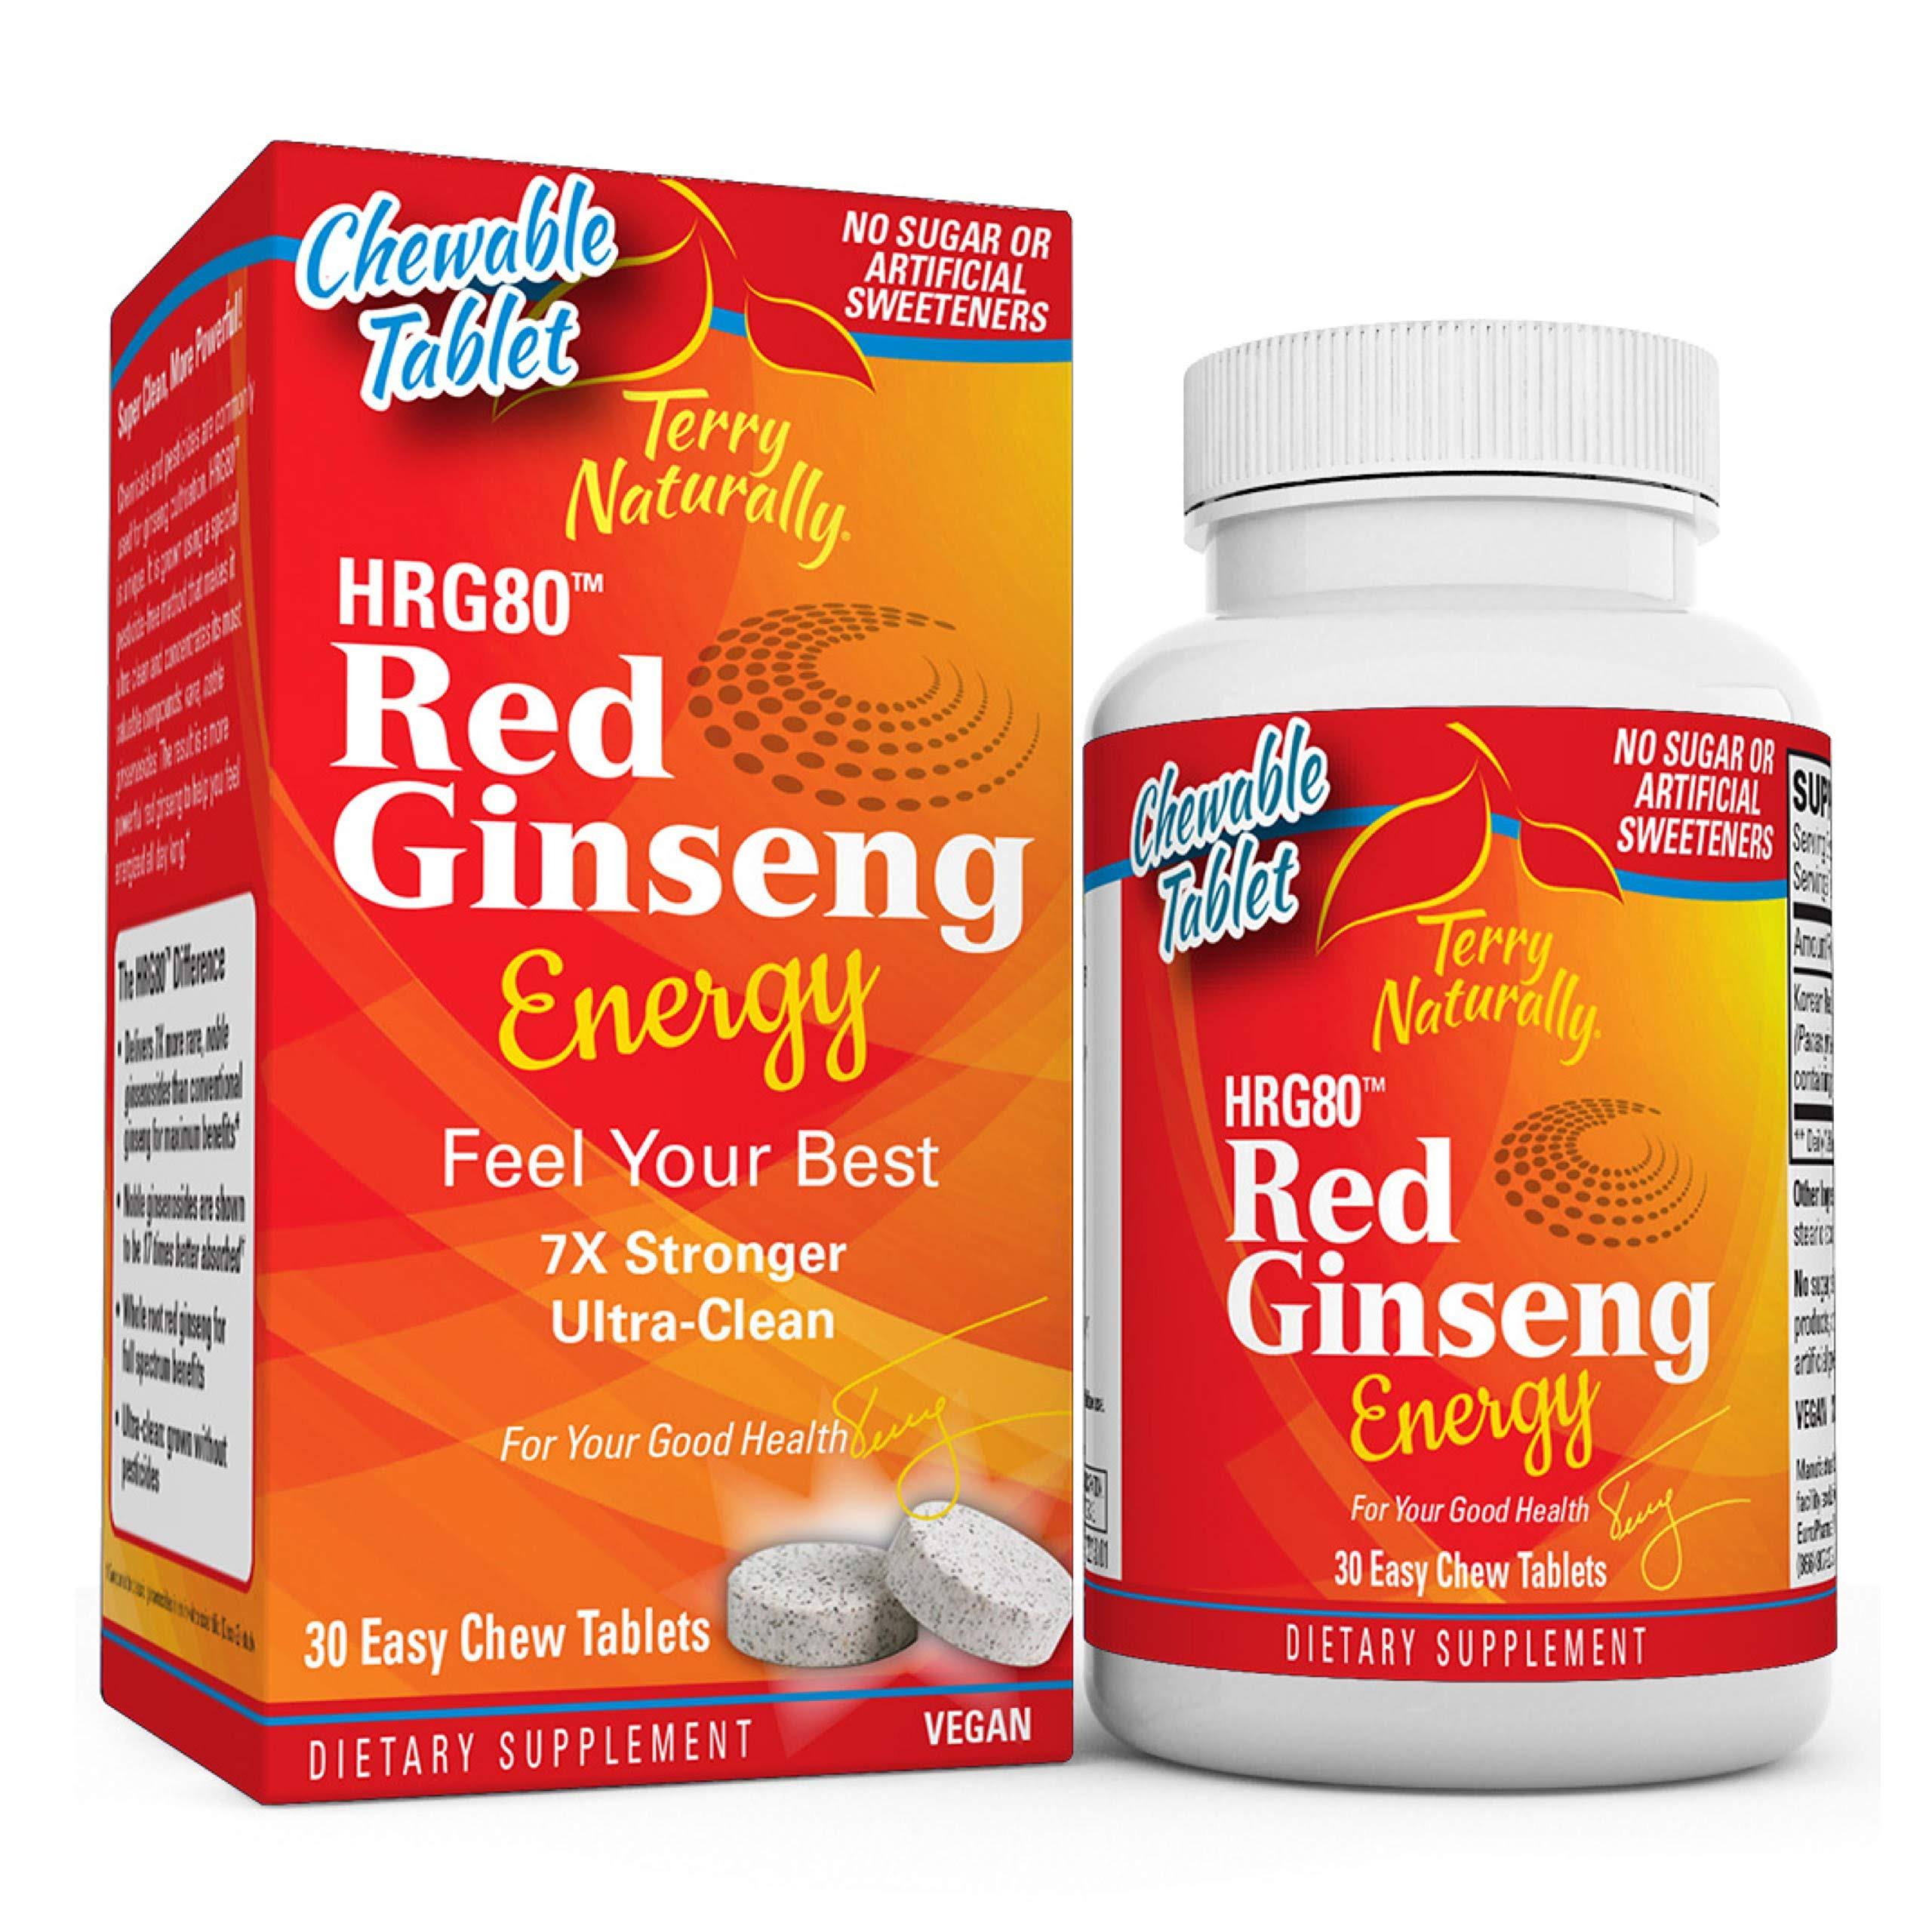 Terry Naturally HRG80 Red Ginseng Energy 30 Easy Chew Tablets